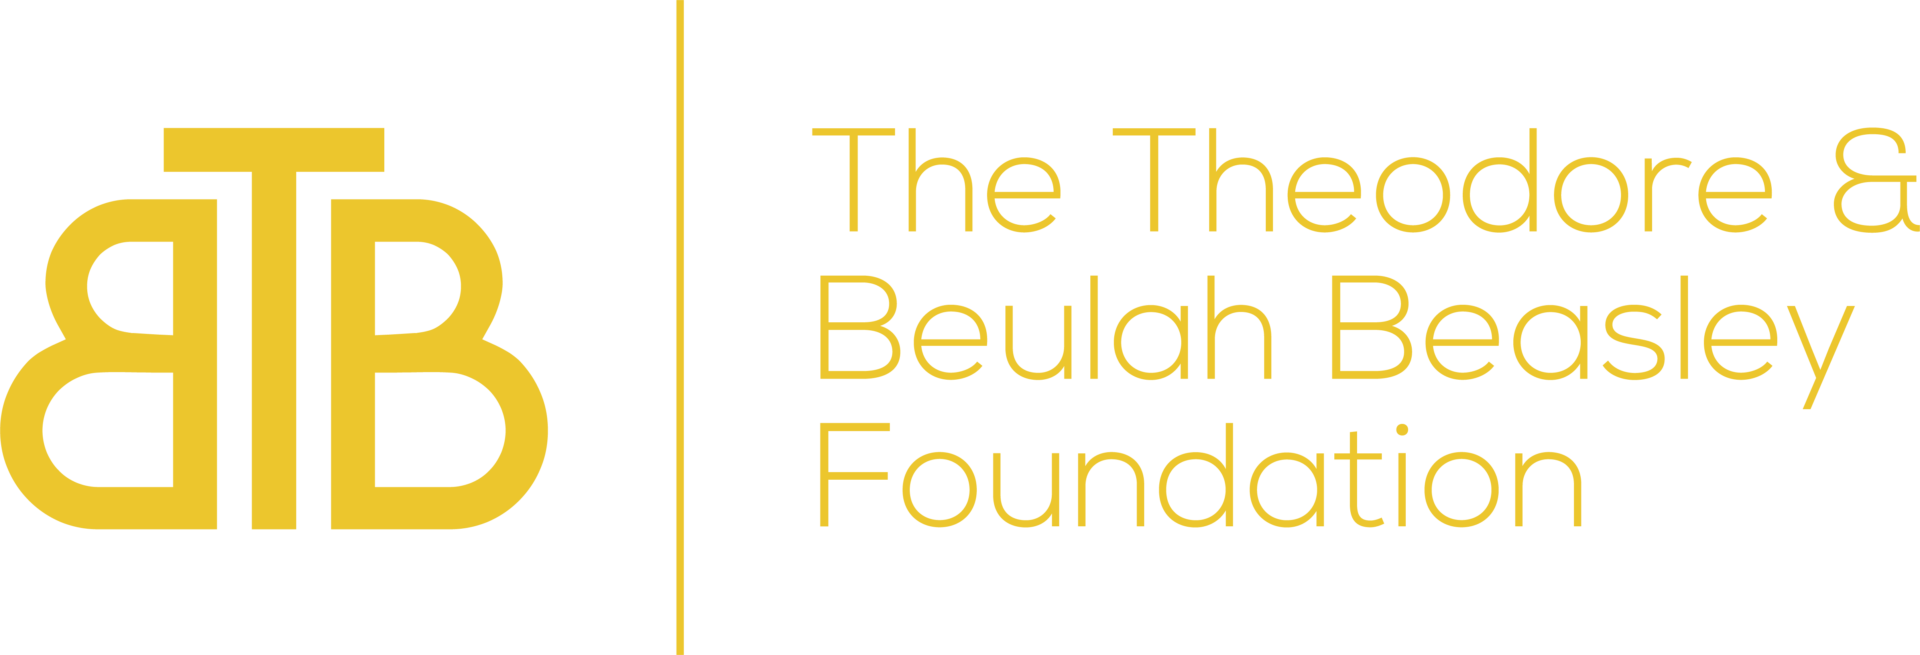 CX-93054_The Theodore and Beulah Beasley Foundation_FINAL